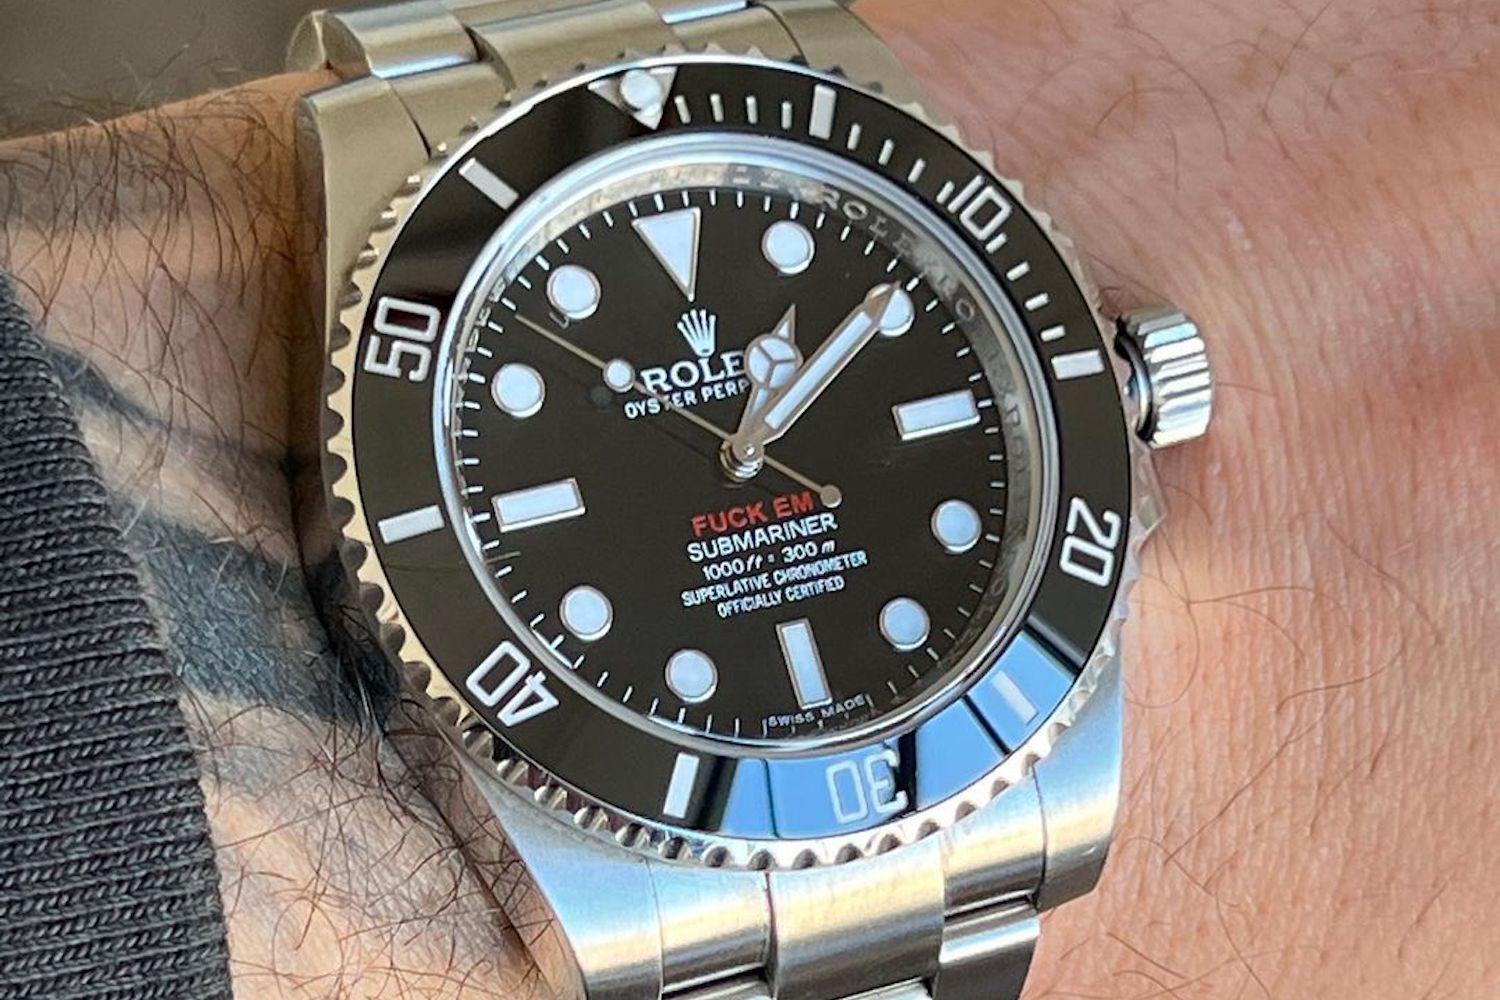 F*ck 'Em': Rare Supreme-Branded Rolex May Be Most Obnoxious Watch Ever